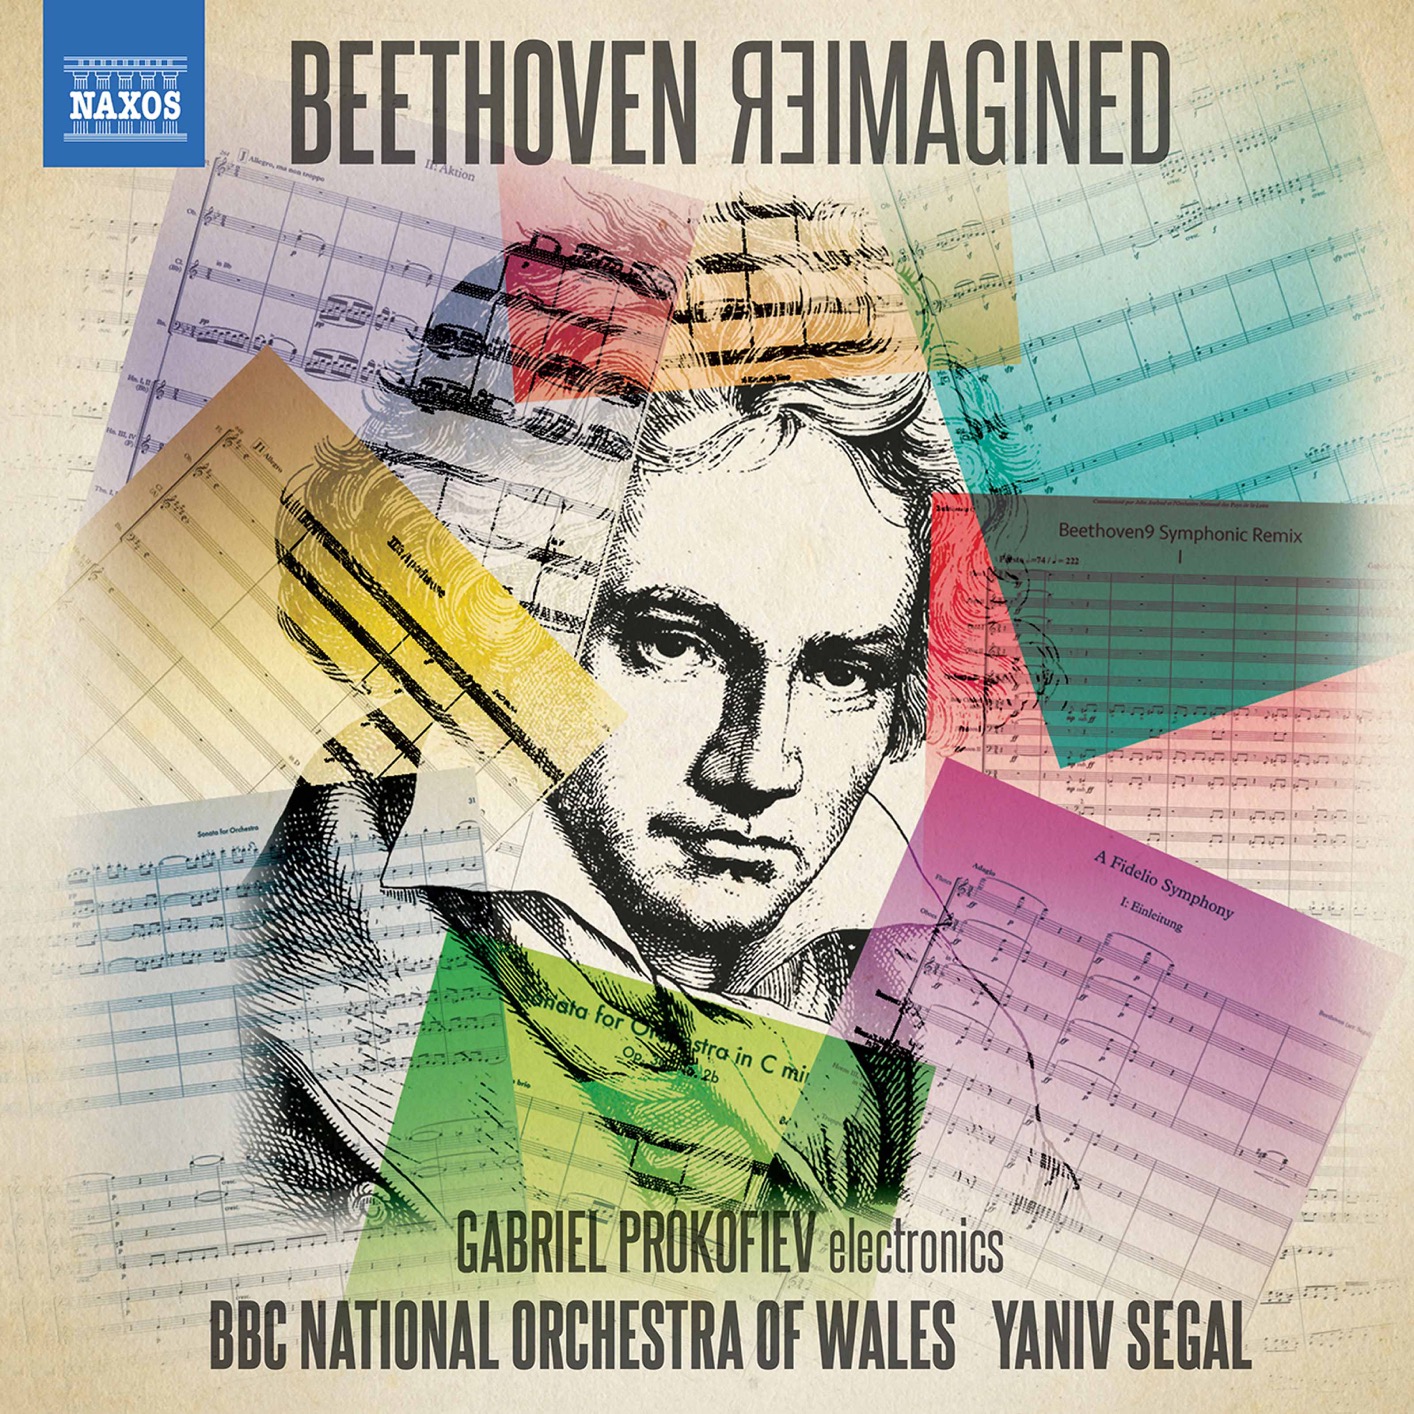 BBC National Orchestra of Wales & Yaniv Segal – Beethoven Reimagined (2020) [FLAC 24bit/96kHz]